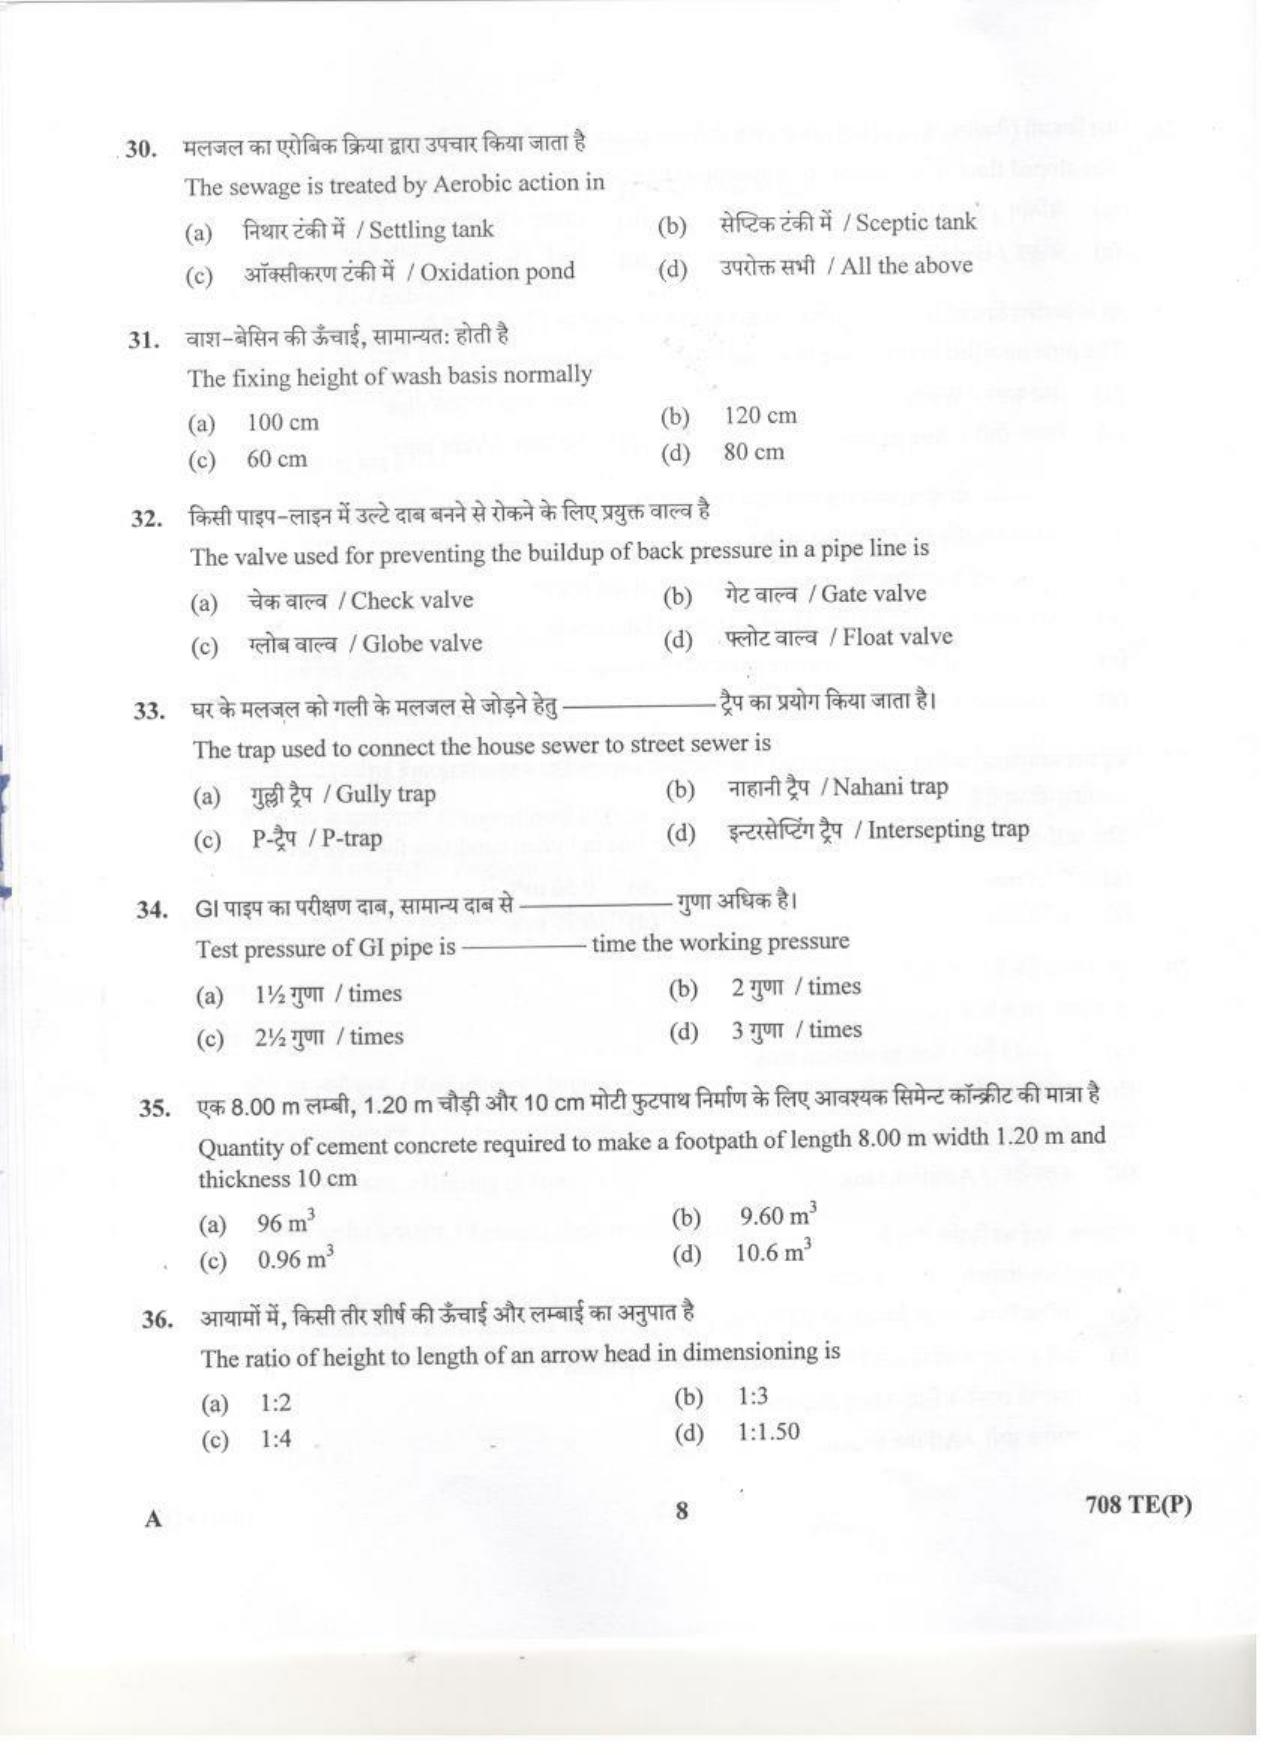 LPSC Technician ‘B’ (Plumber) 2020 Question Paper - Page 7